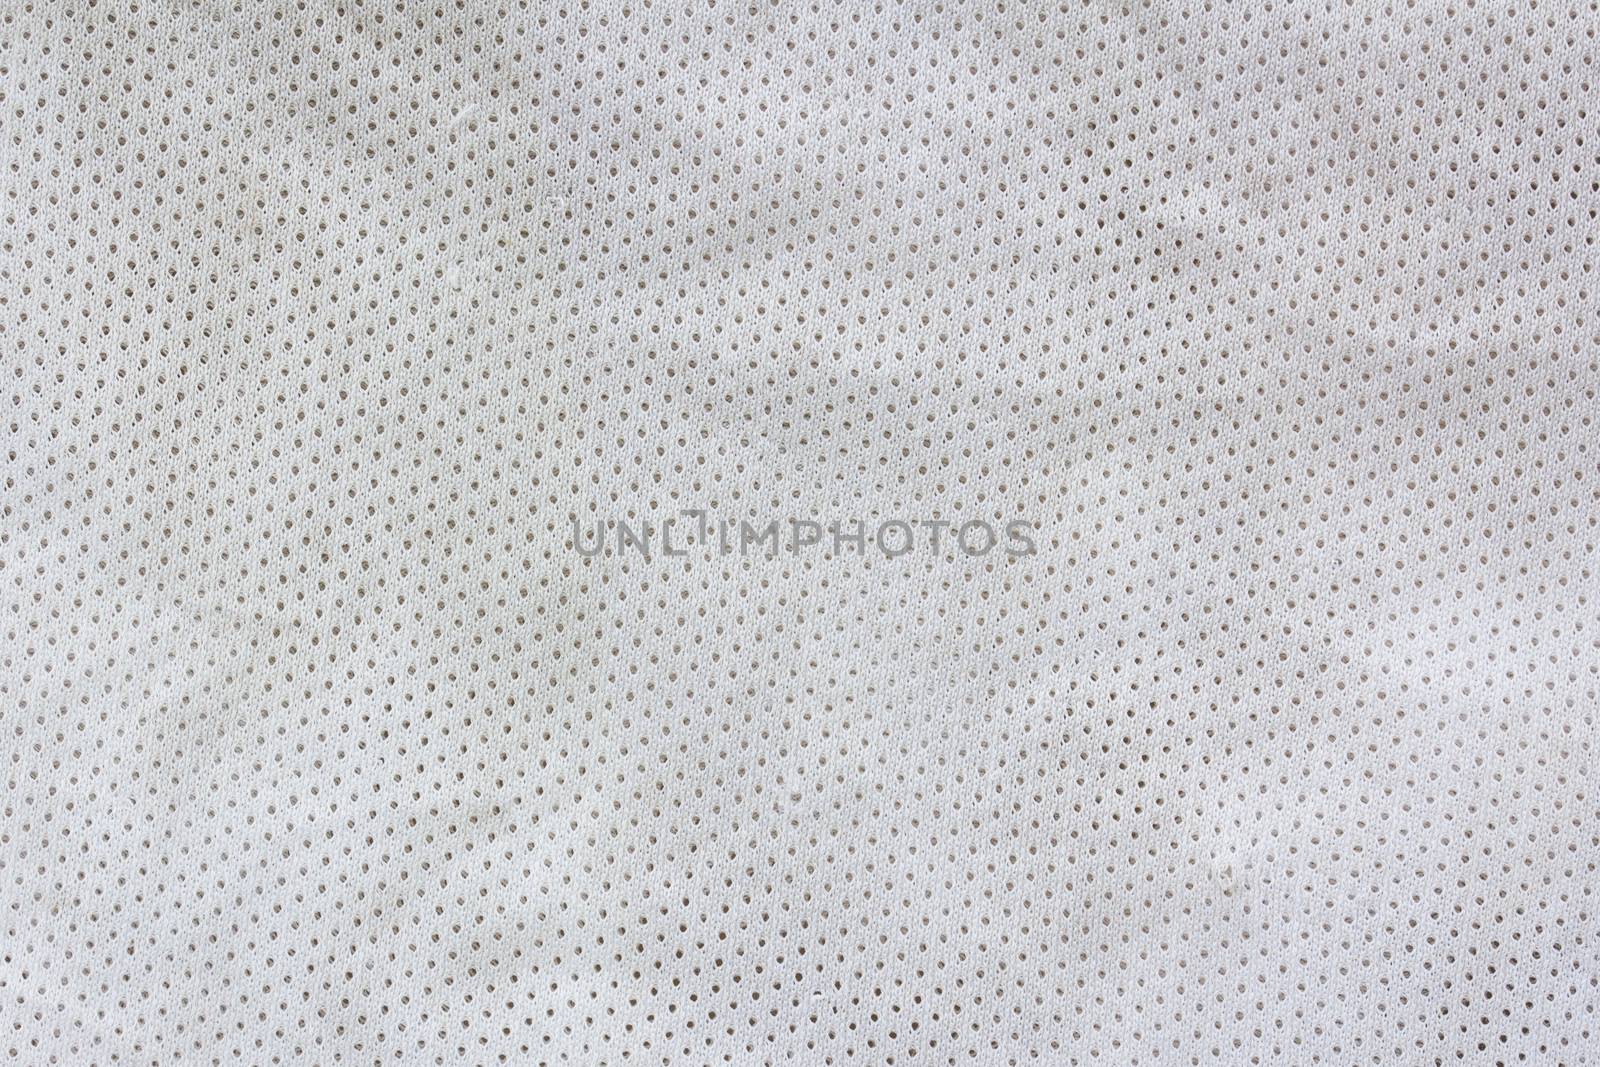 extreme closeup of fabric texture in high resolution, background.